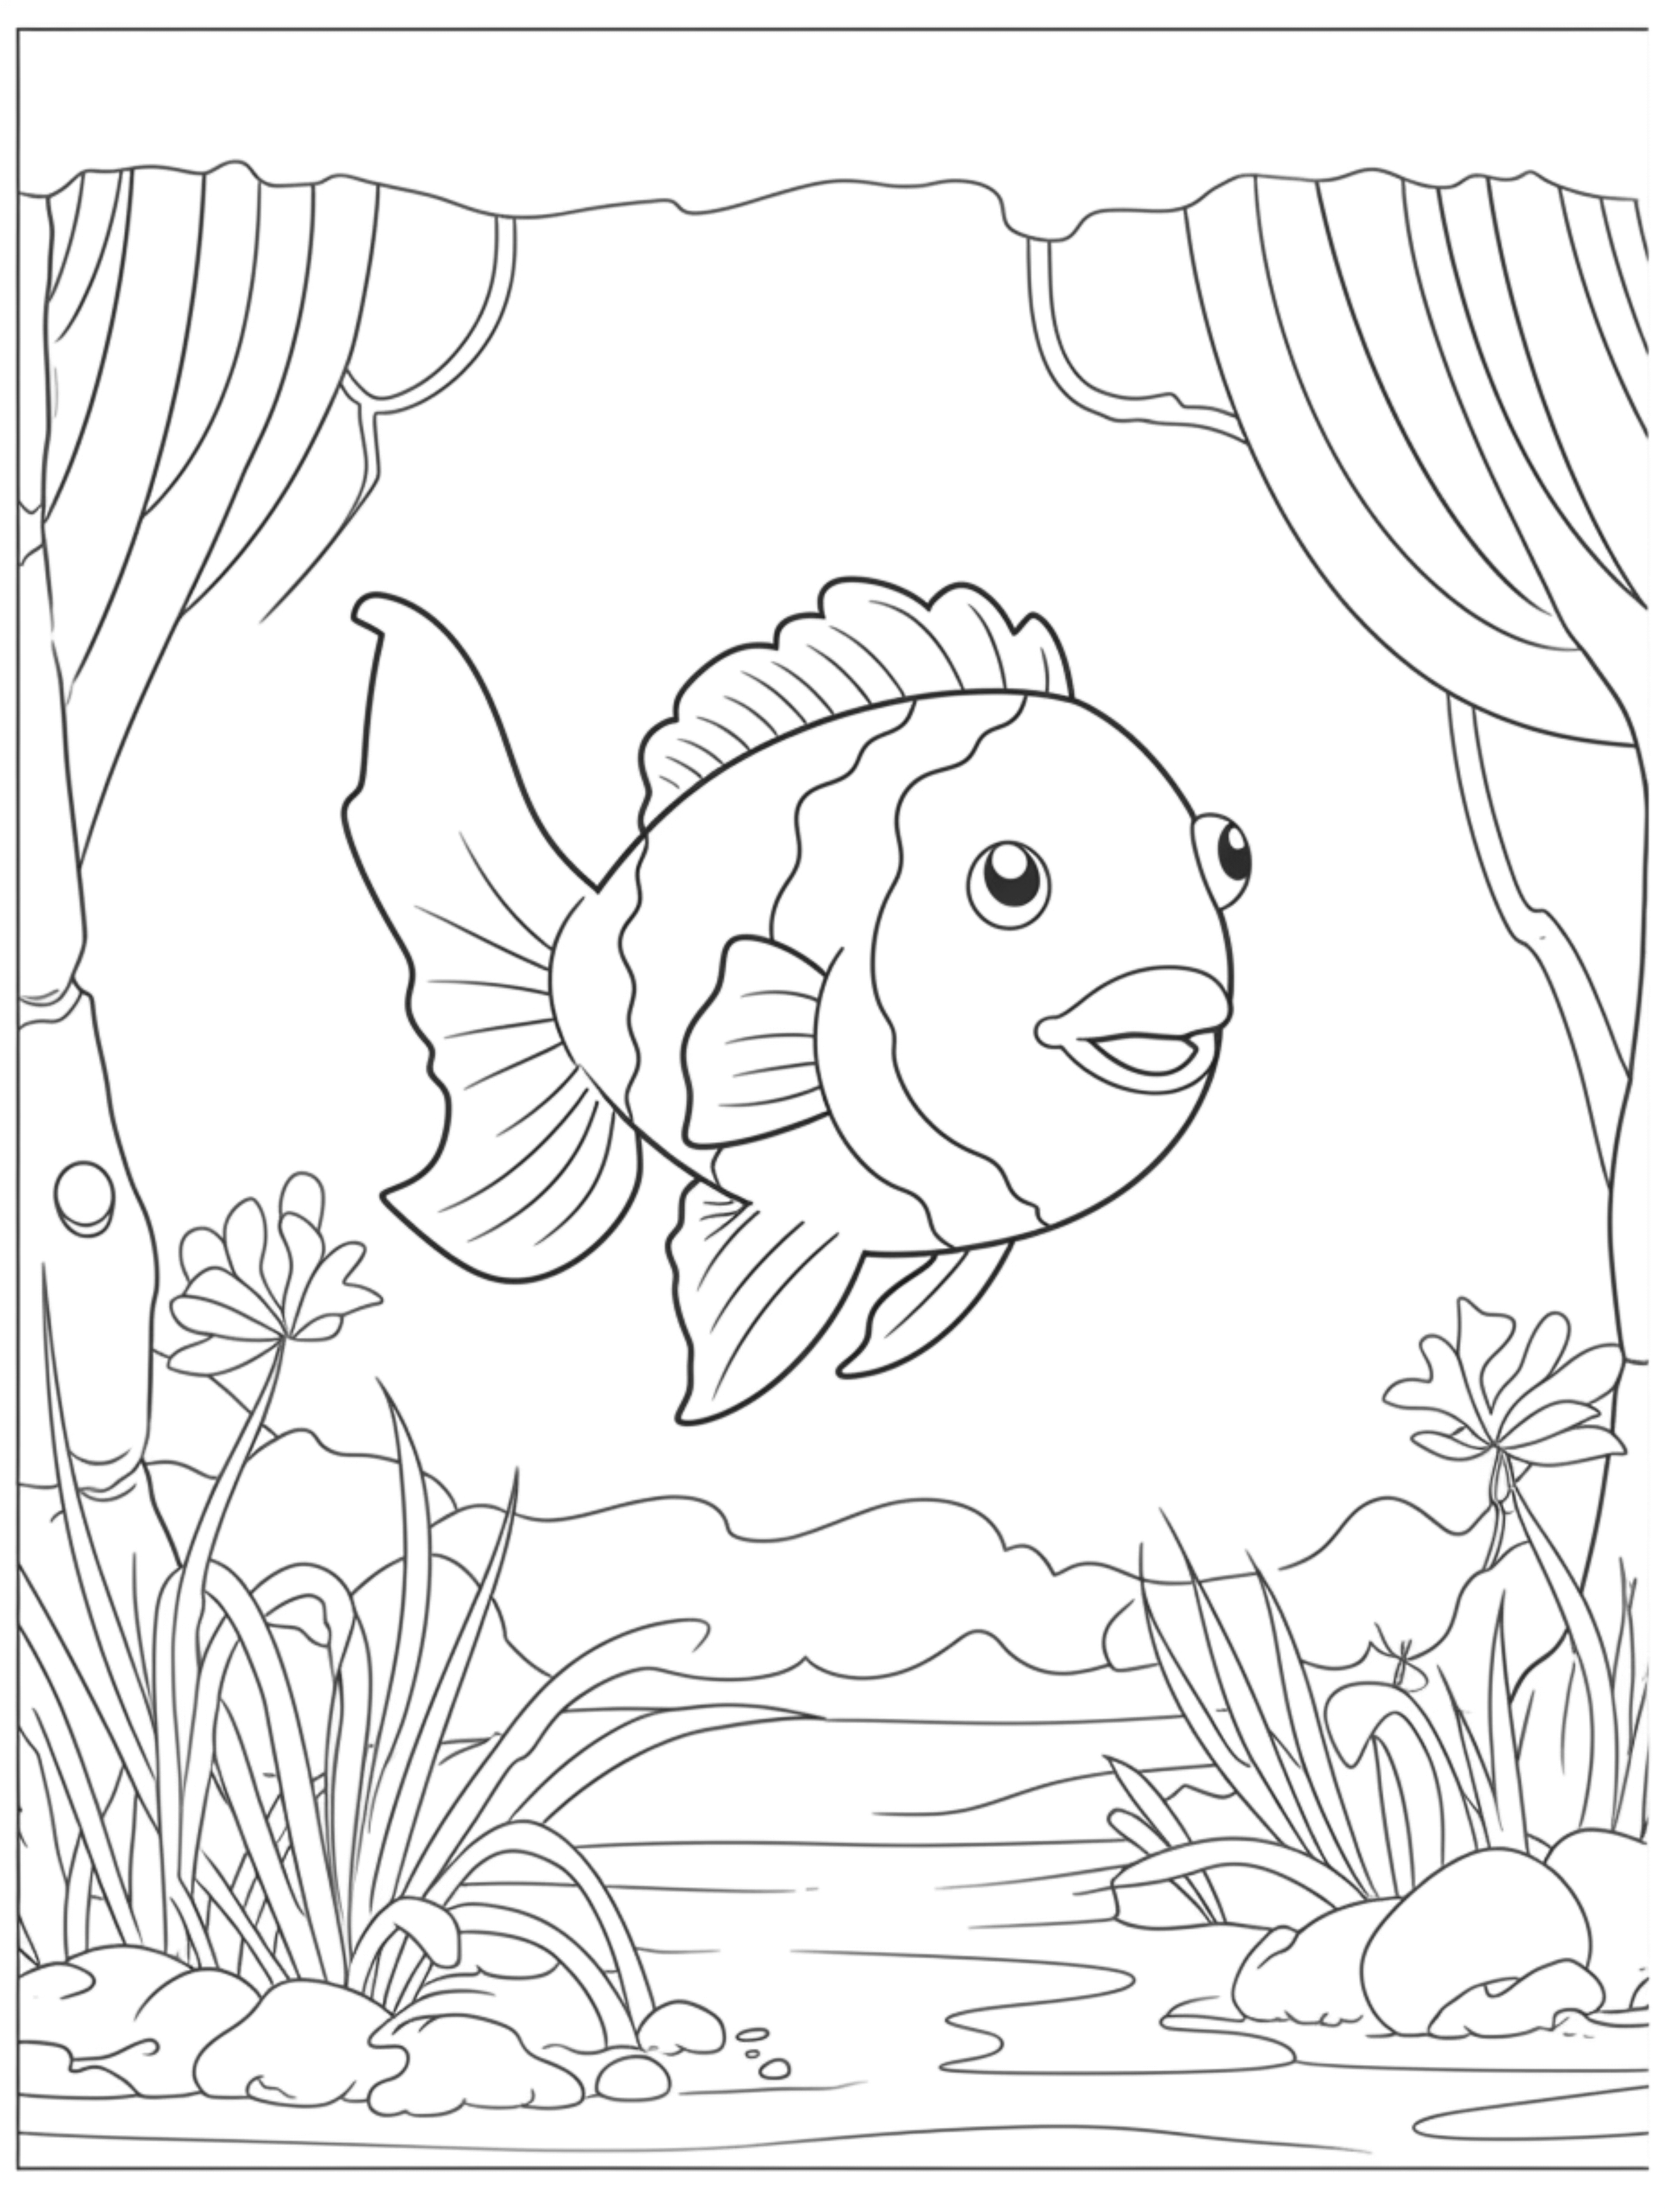 clownfish coloring page